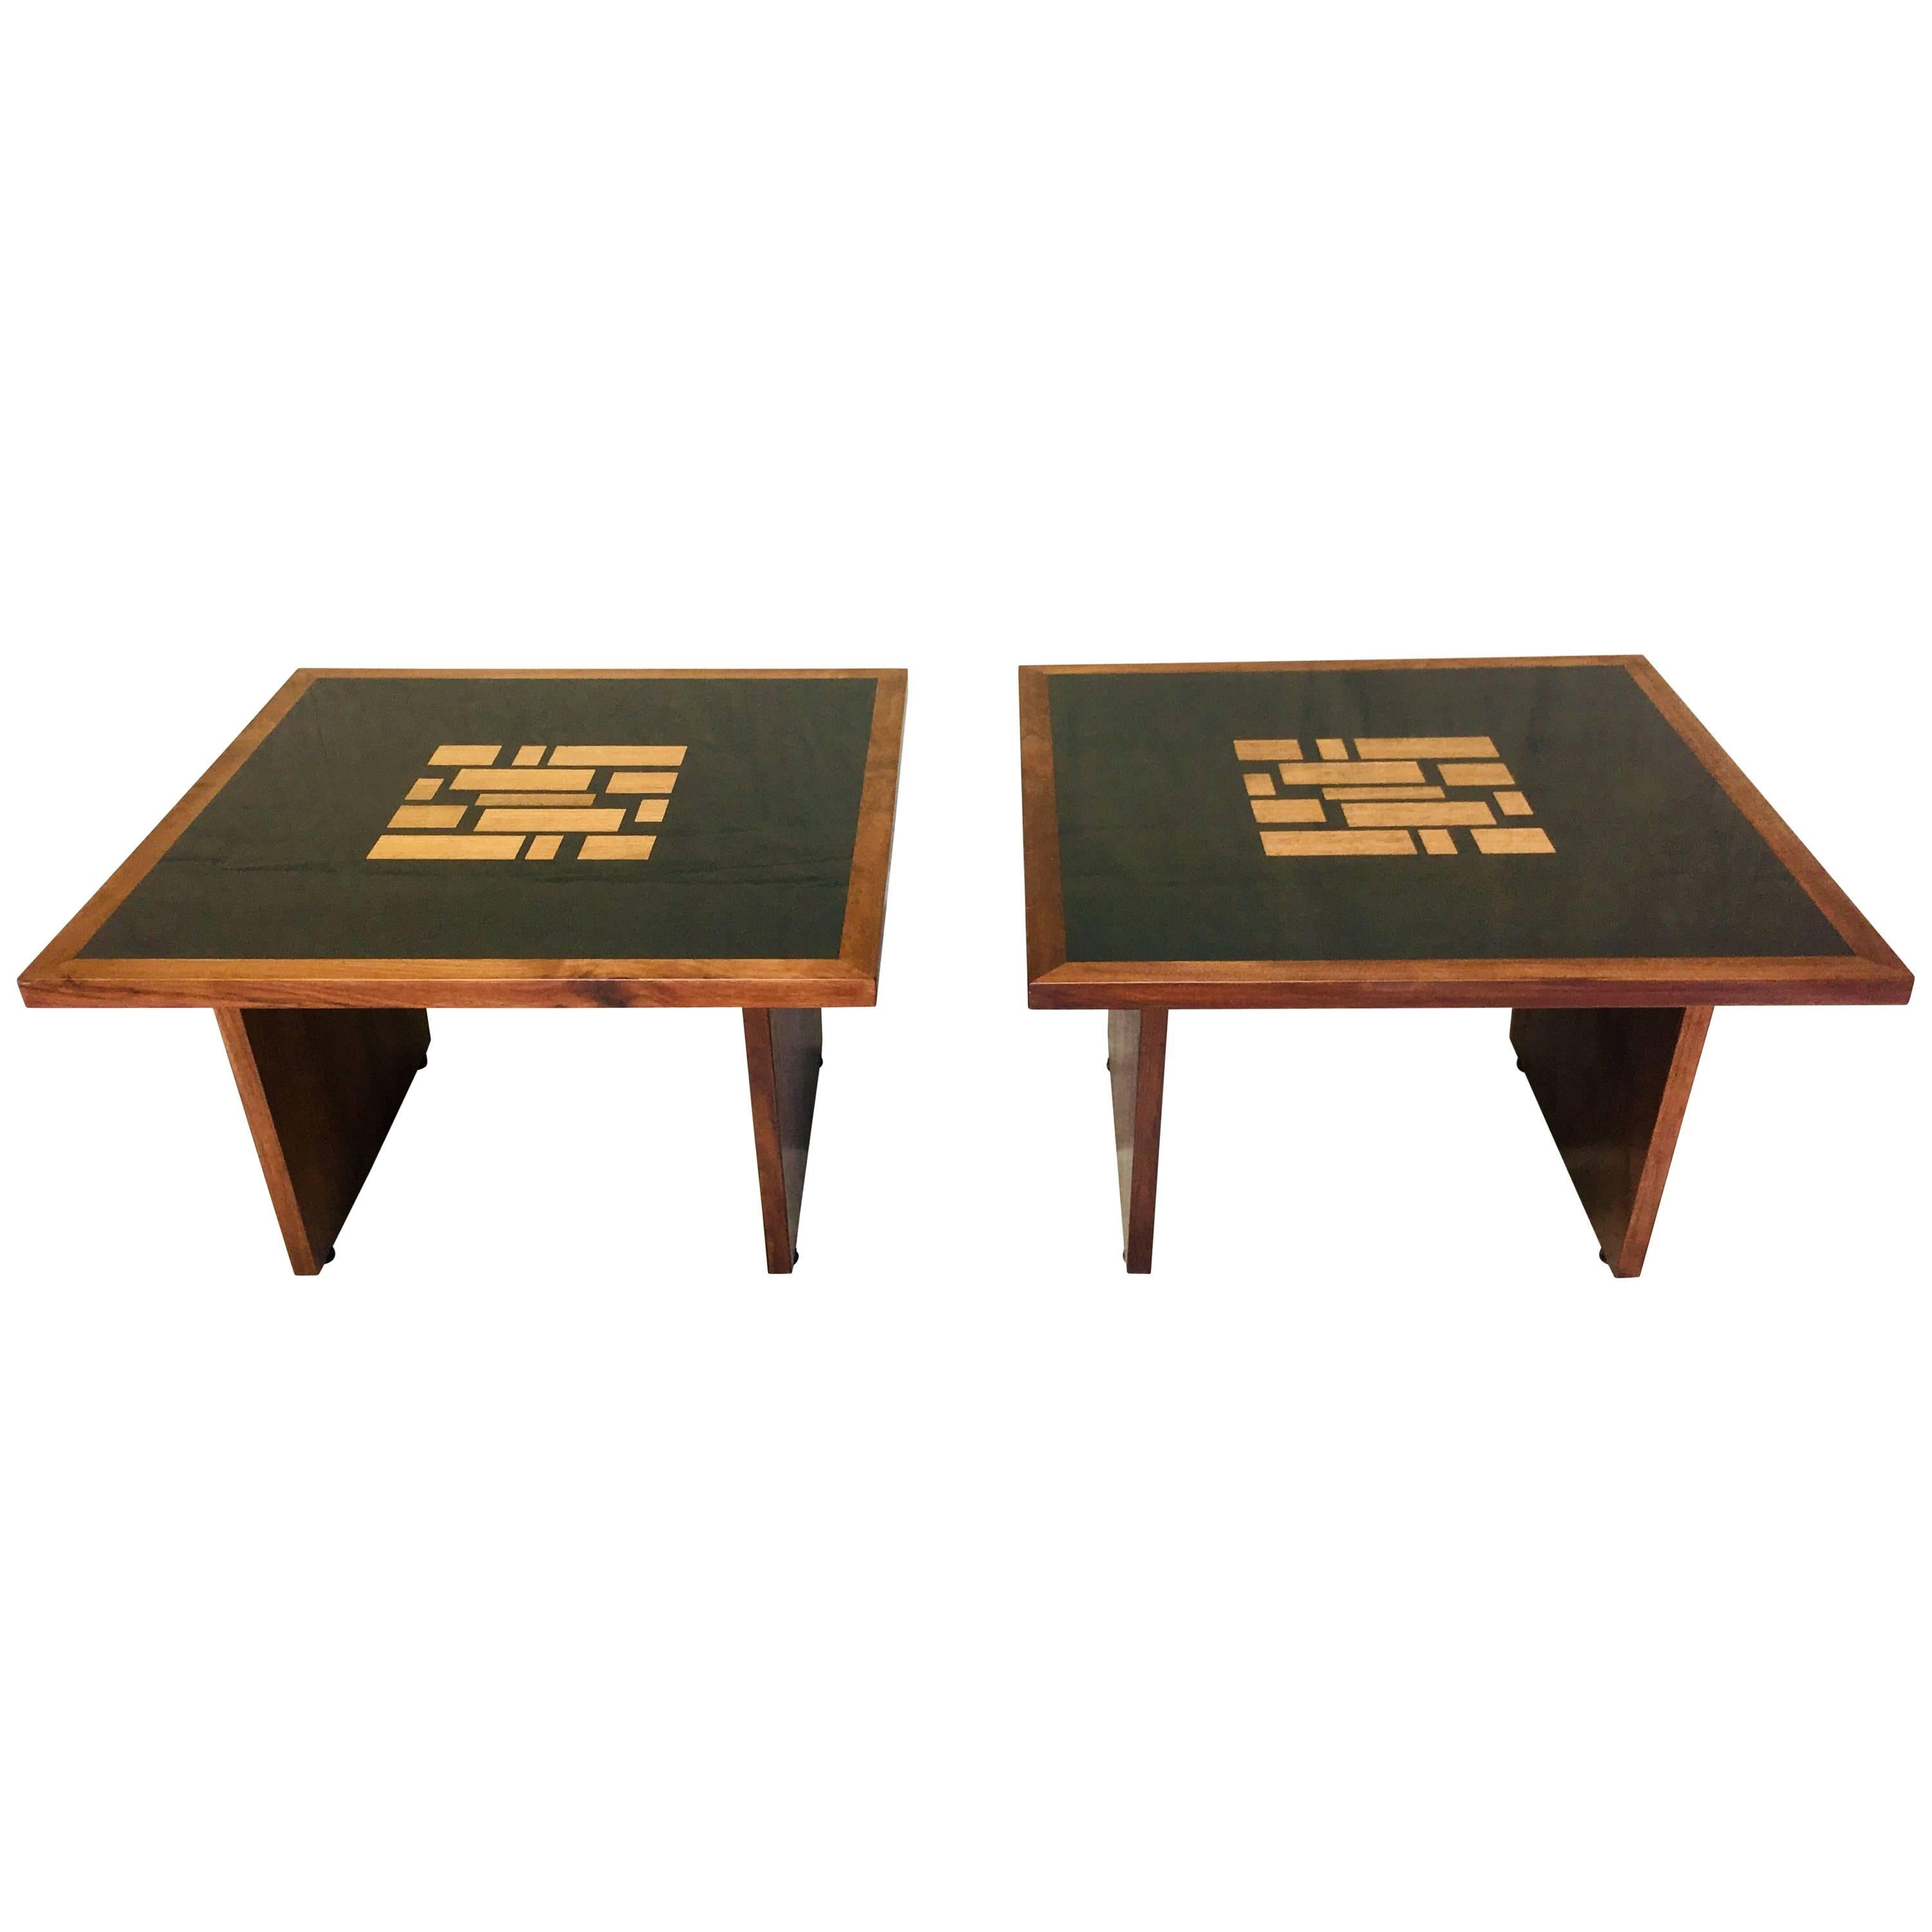 End tables by Frank Rohloff, Walnut with Black inset, California 1960s